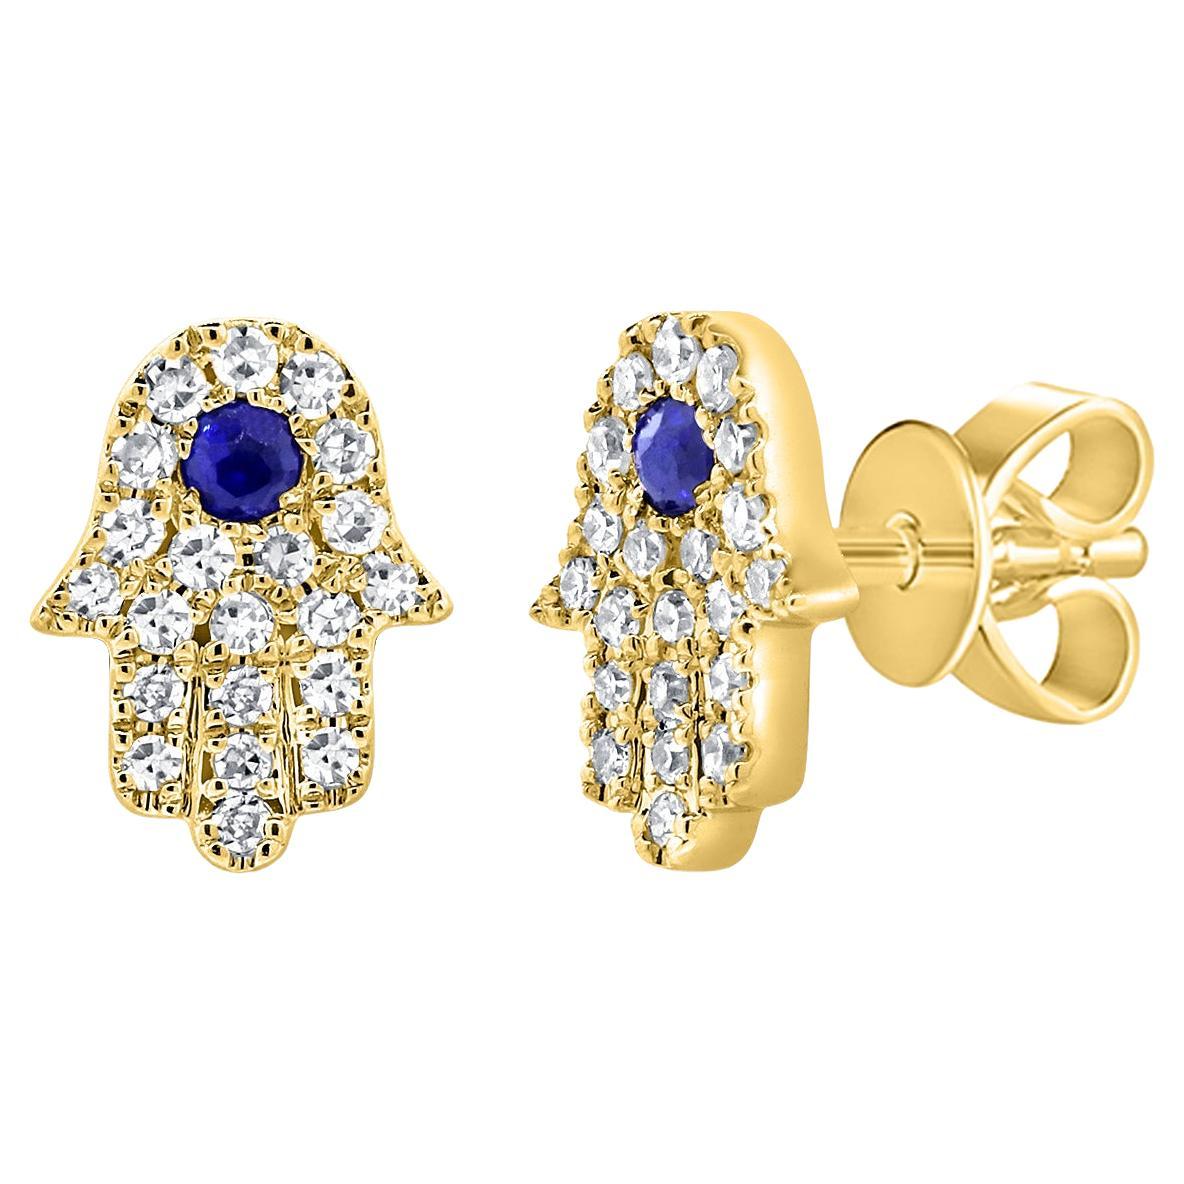 14K Yellow Gold Diamond & Sapphire Hand of Gd Stud Earrings For Sale